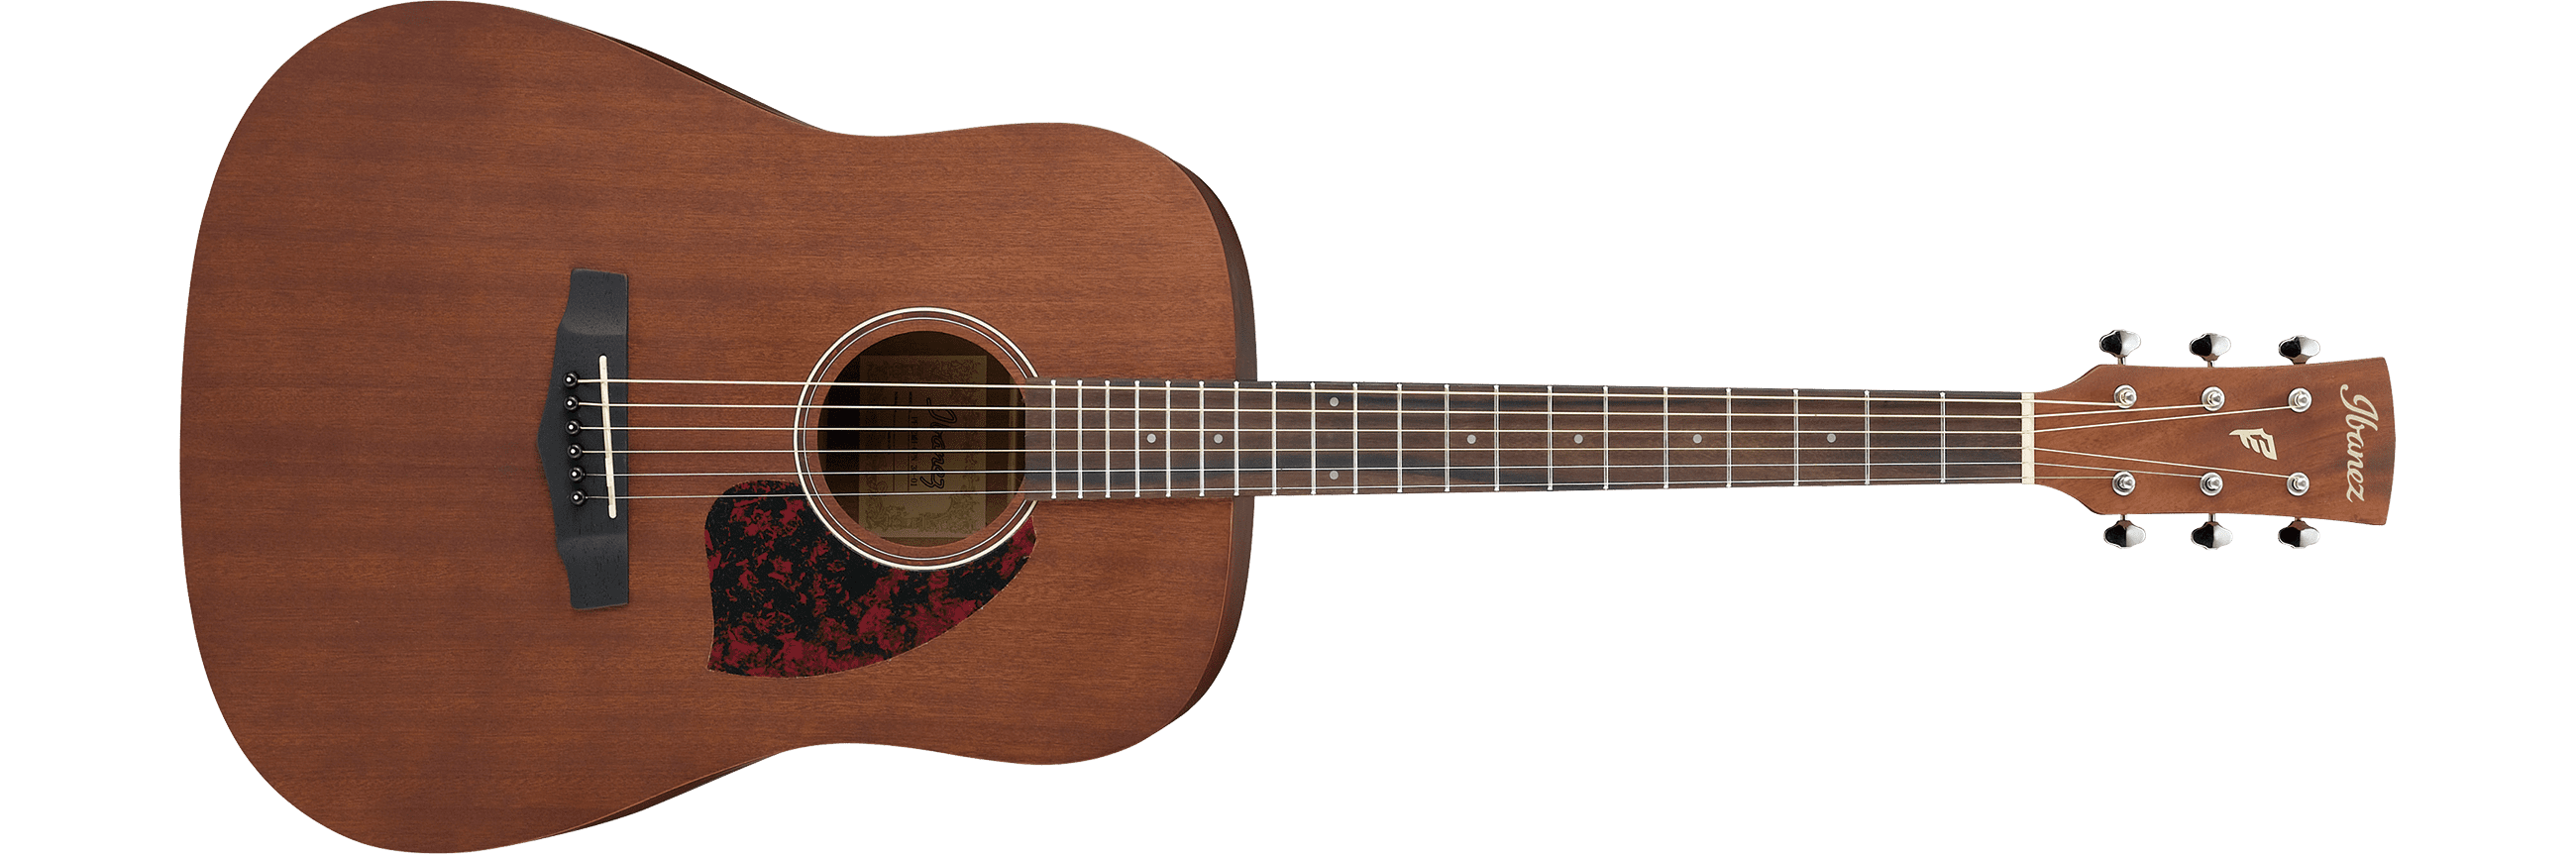 Ibanez PF12MH-OPN 6 String Right Handed Acoustic Guitar Open Pore Natural Finish